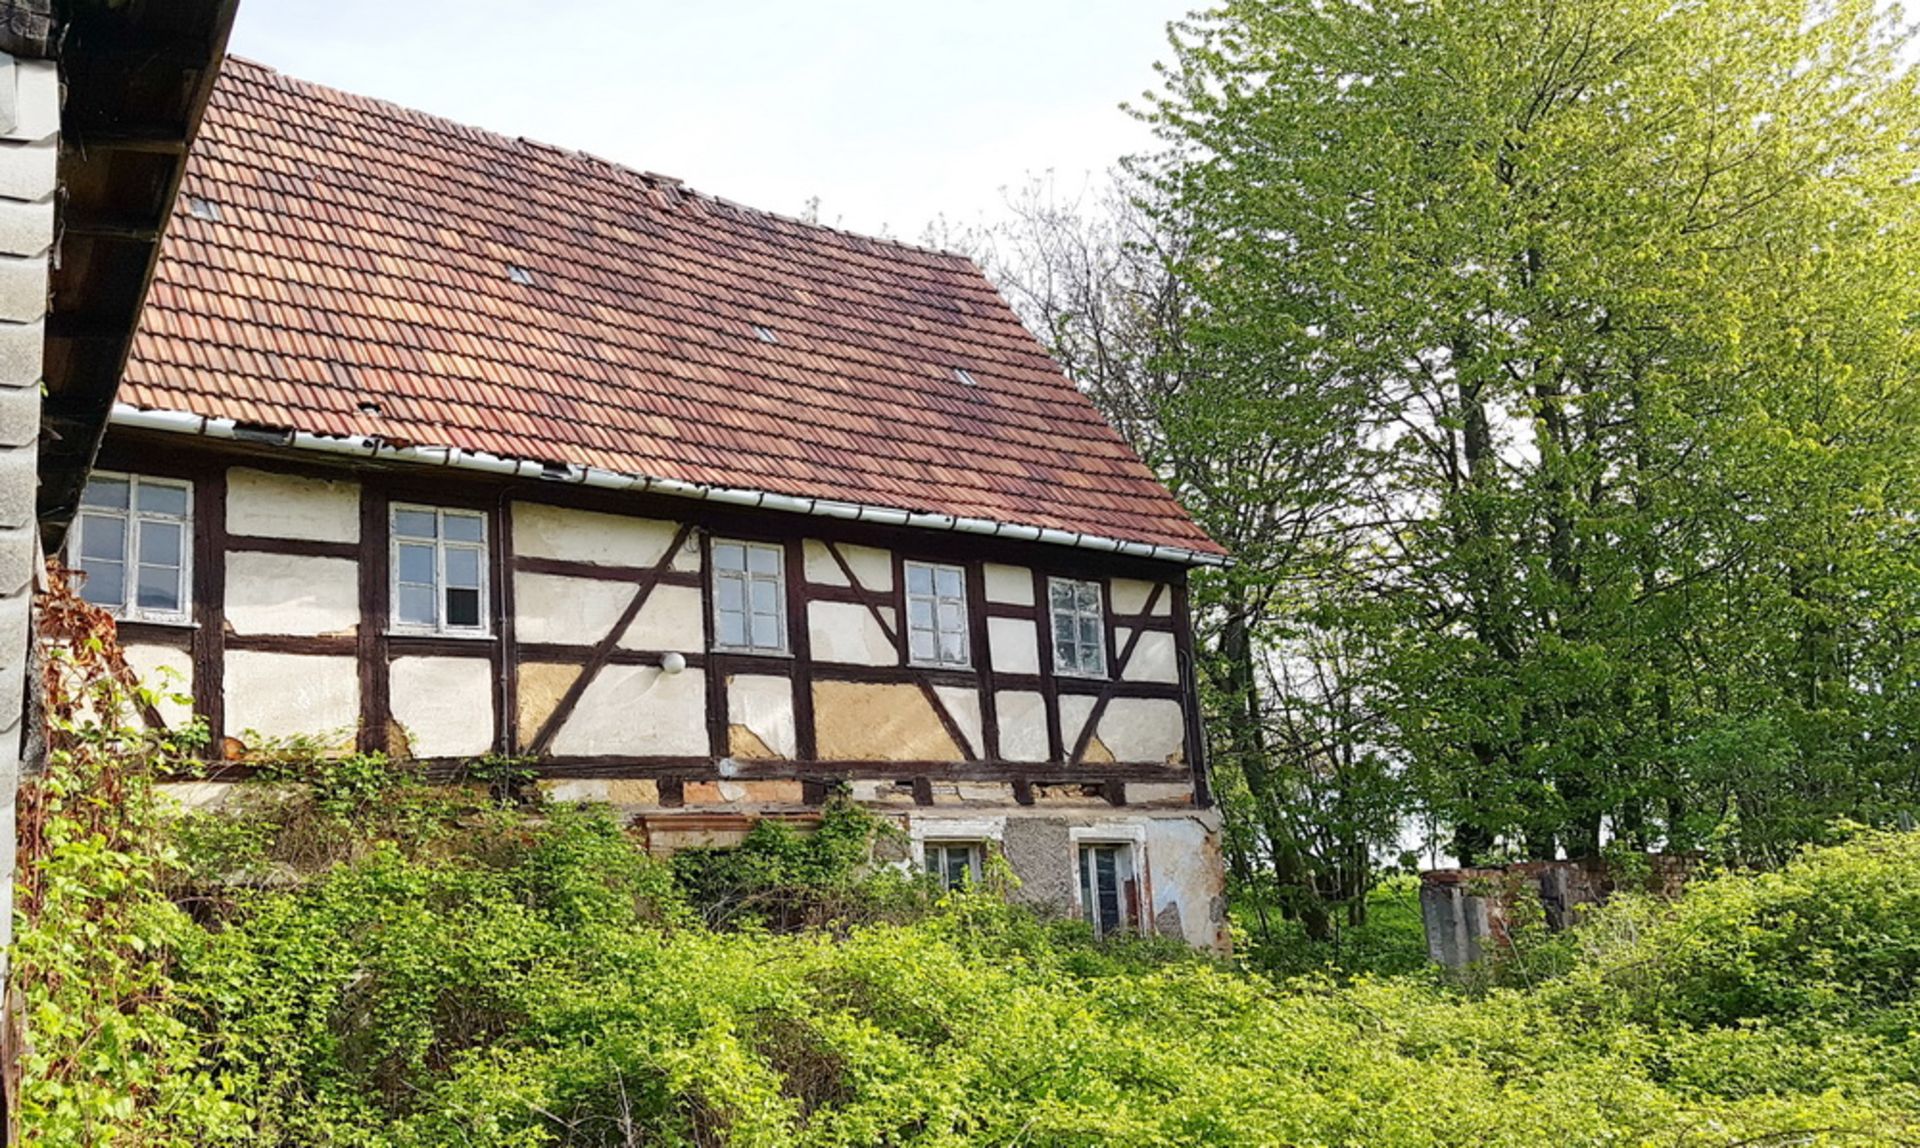 LARGE PROPERTY AND 2,361 SQM OF LAND IN SACHSENDORF, GERMANY - Image 10 of 24